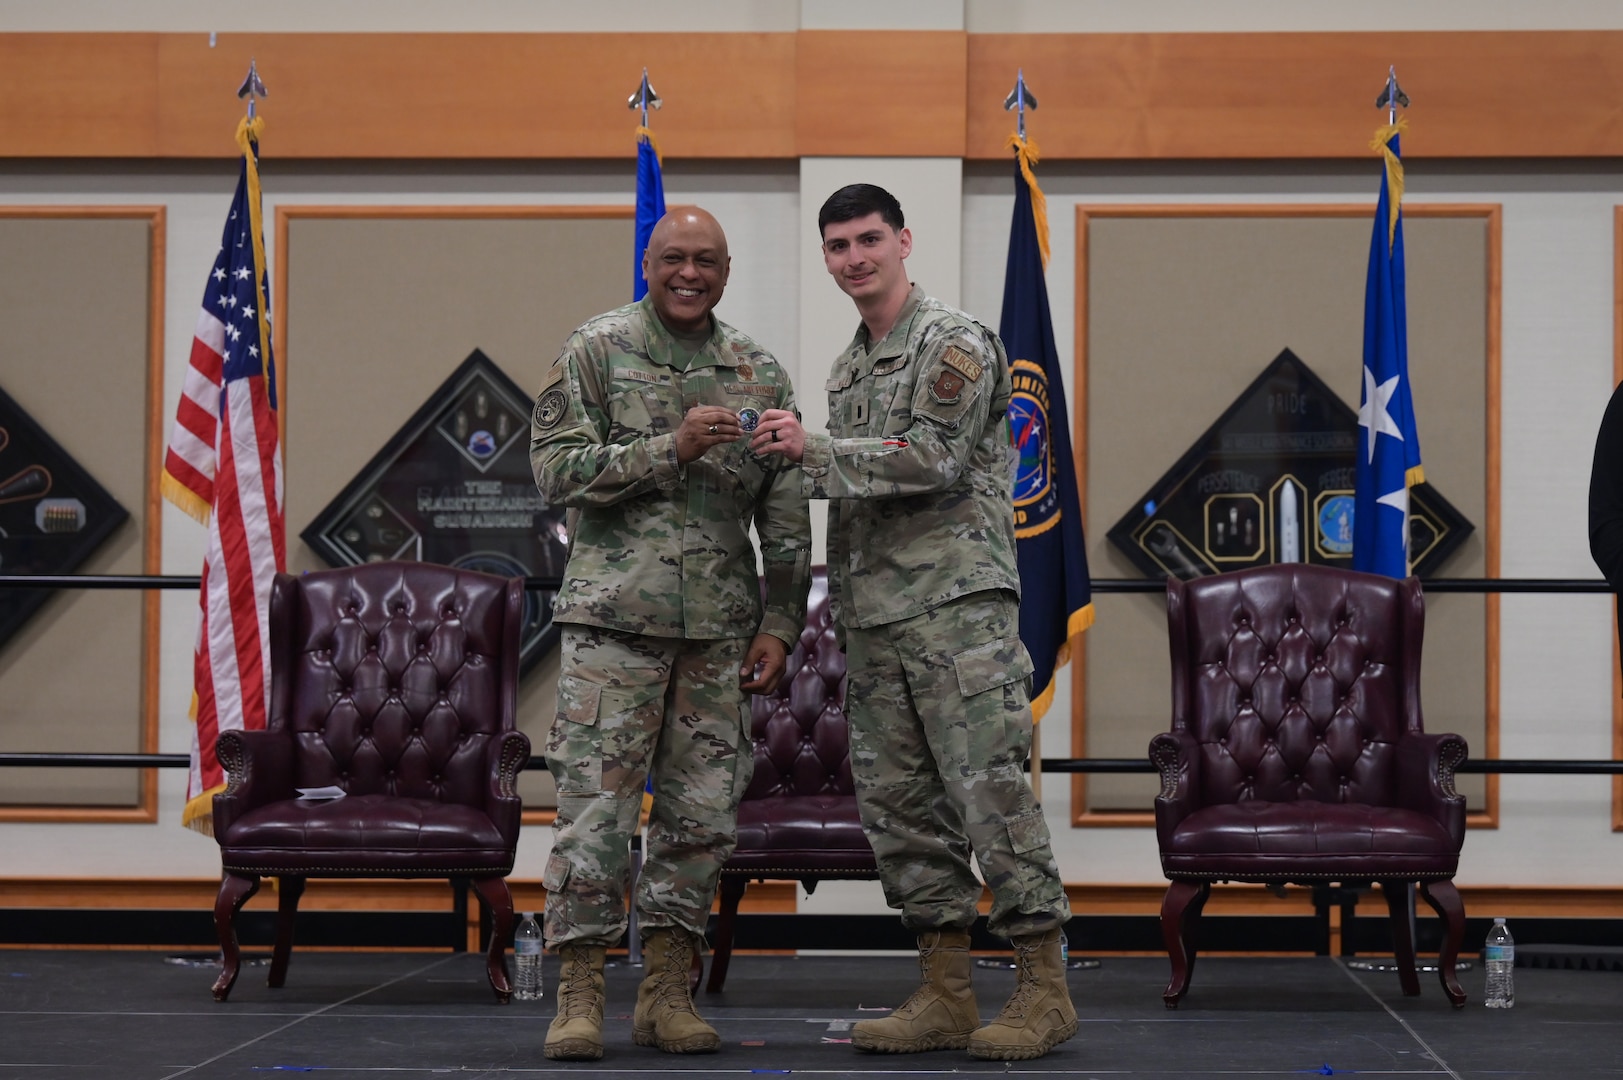 Two men in military uniform stand on stage as they hold a challenge coin together and smile toward the camera.